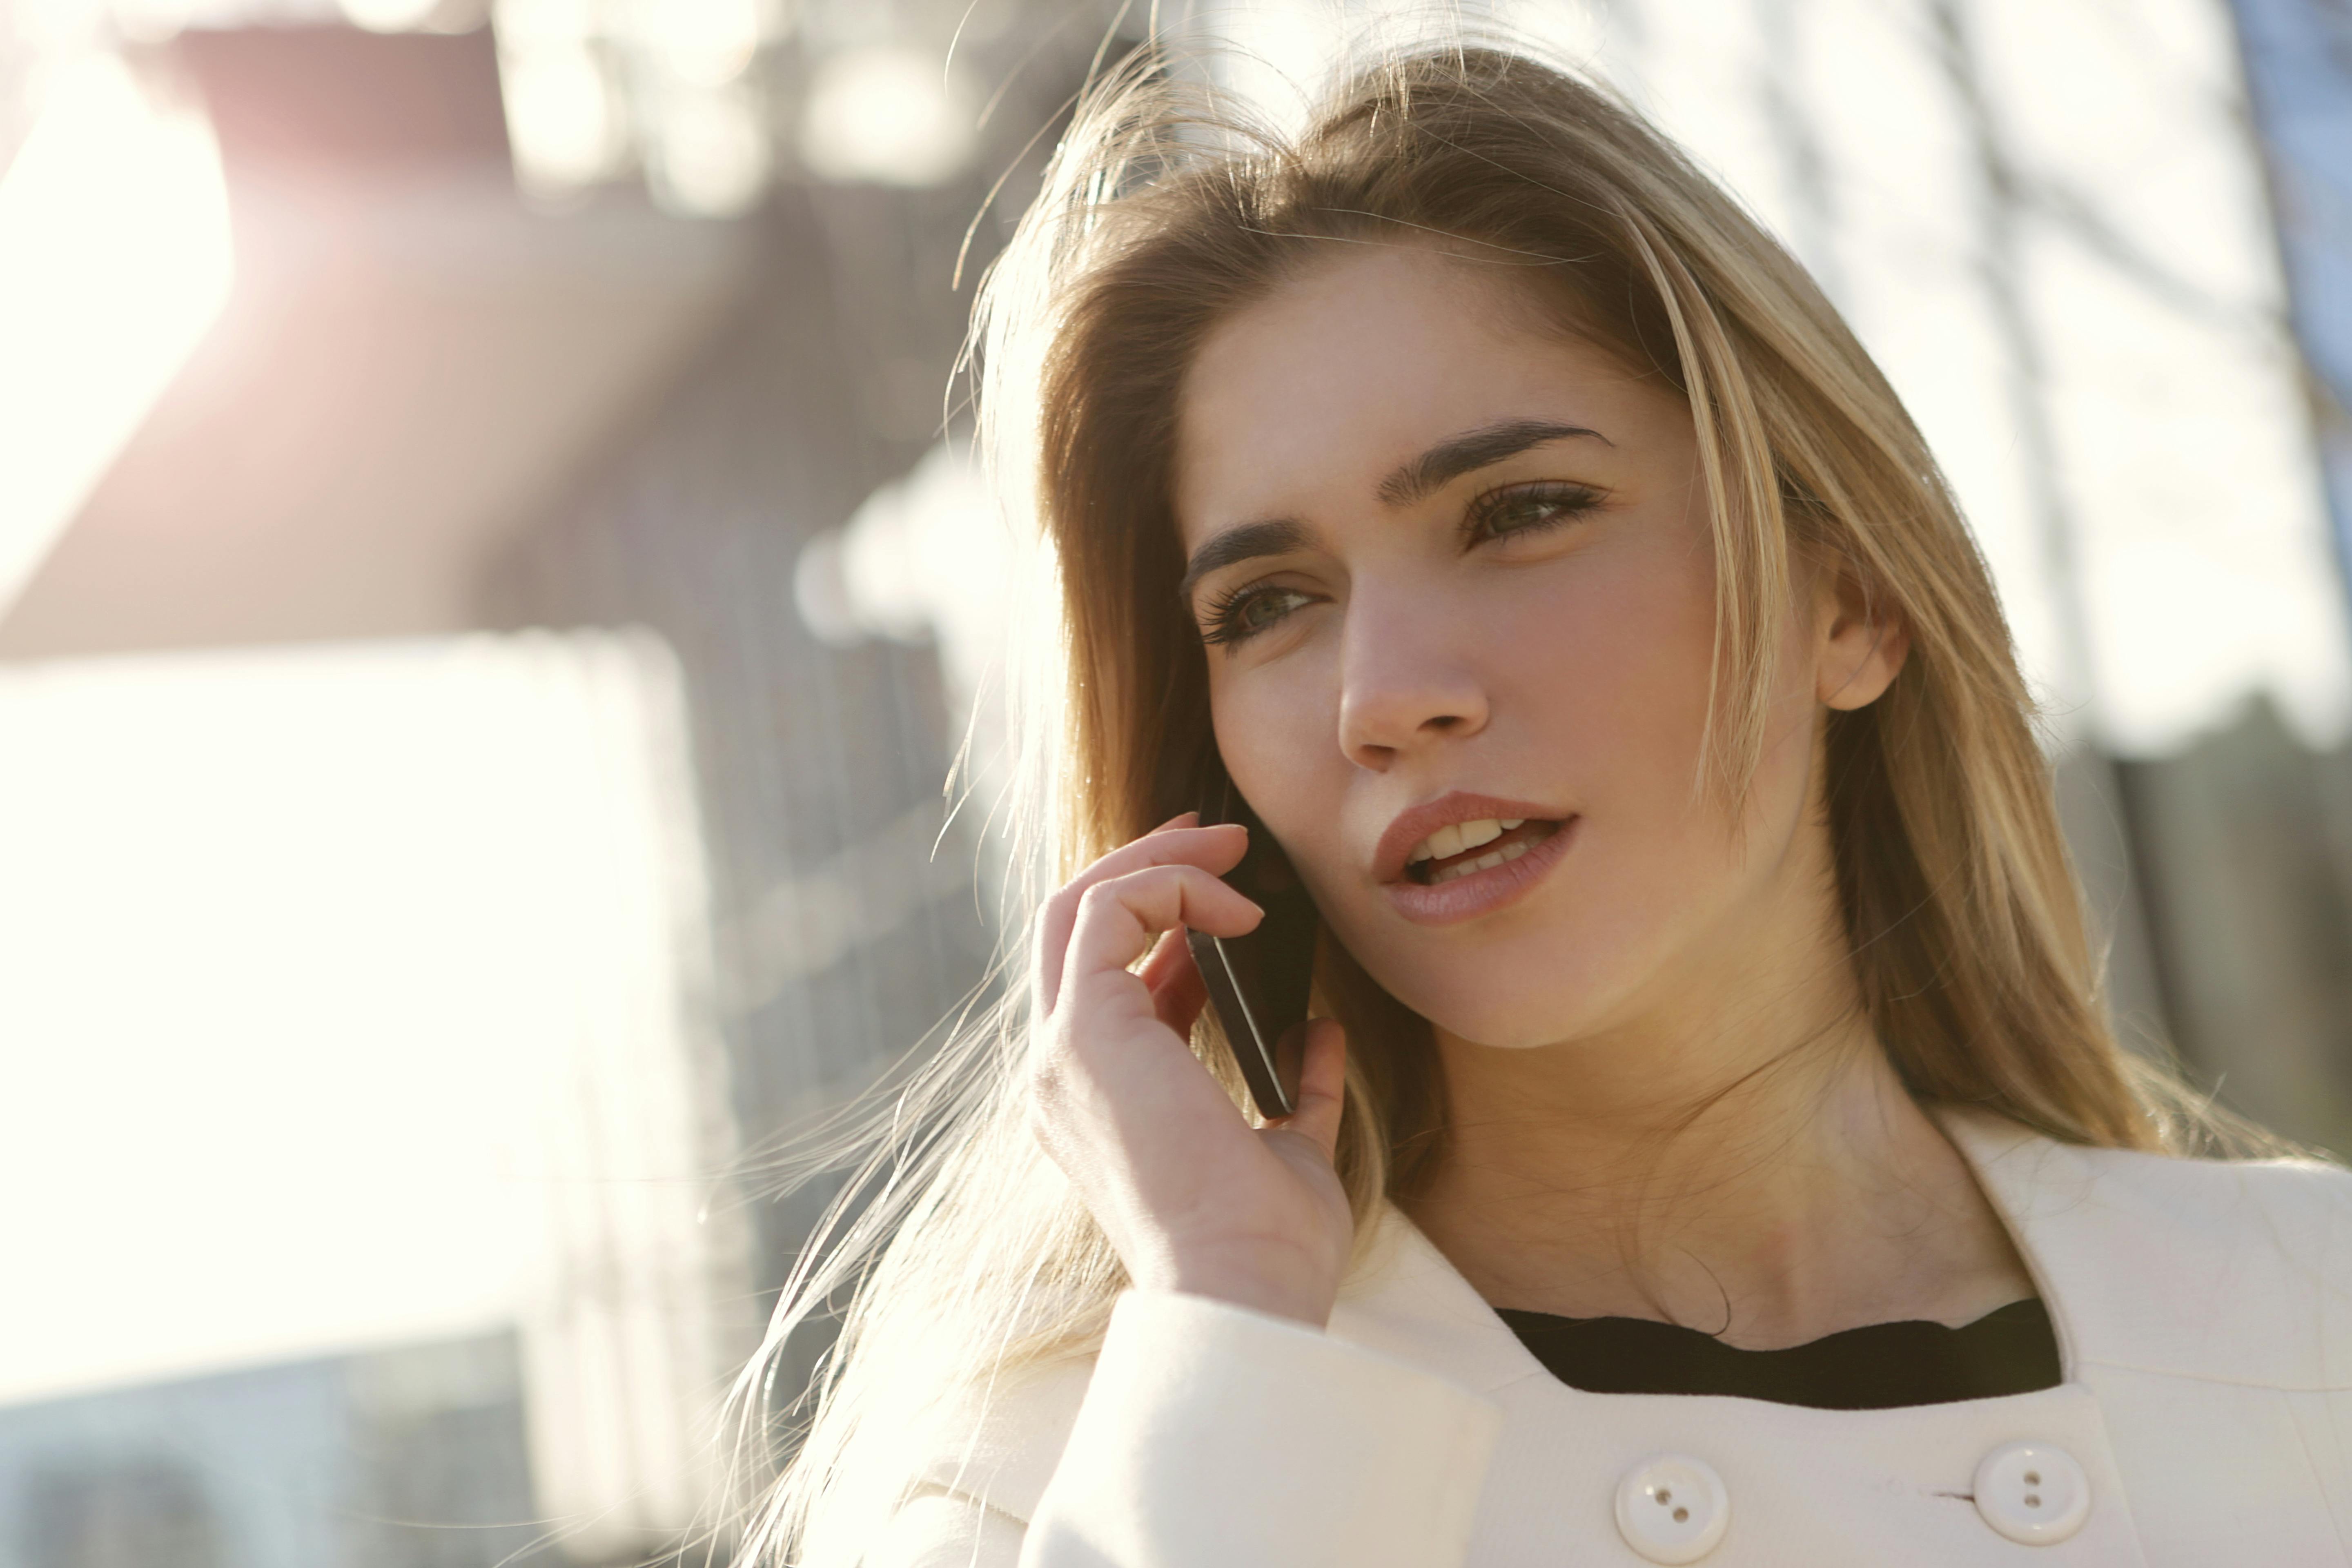 A woman talking on a cell phone | Source: Pexels